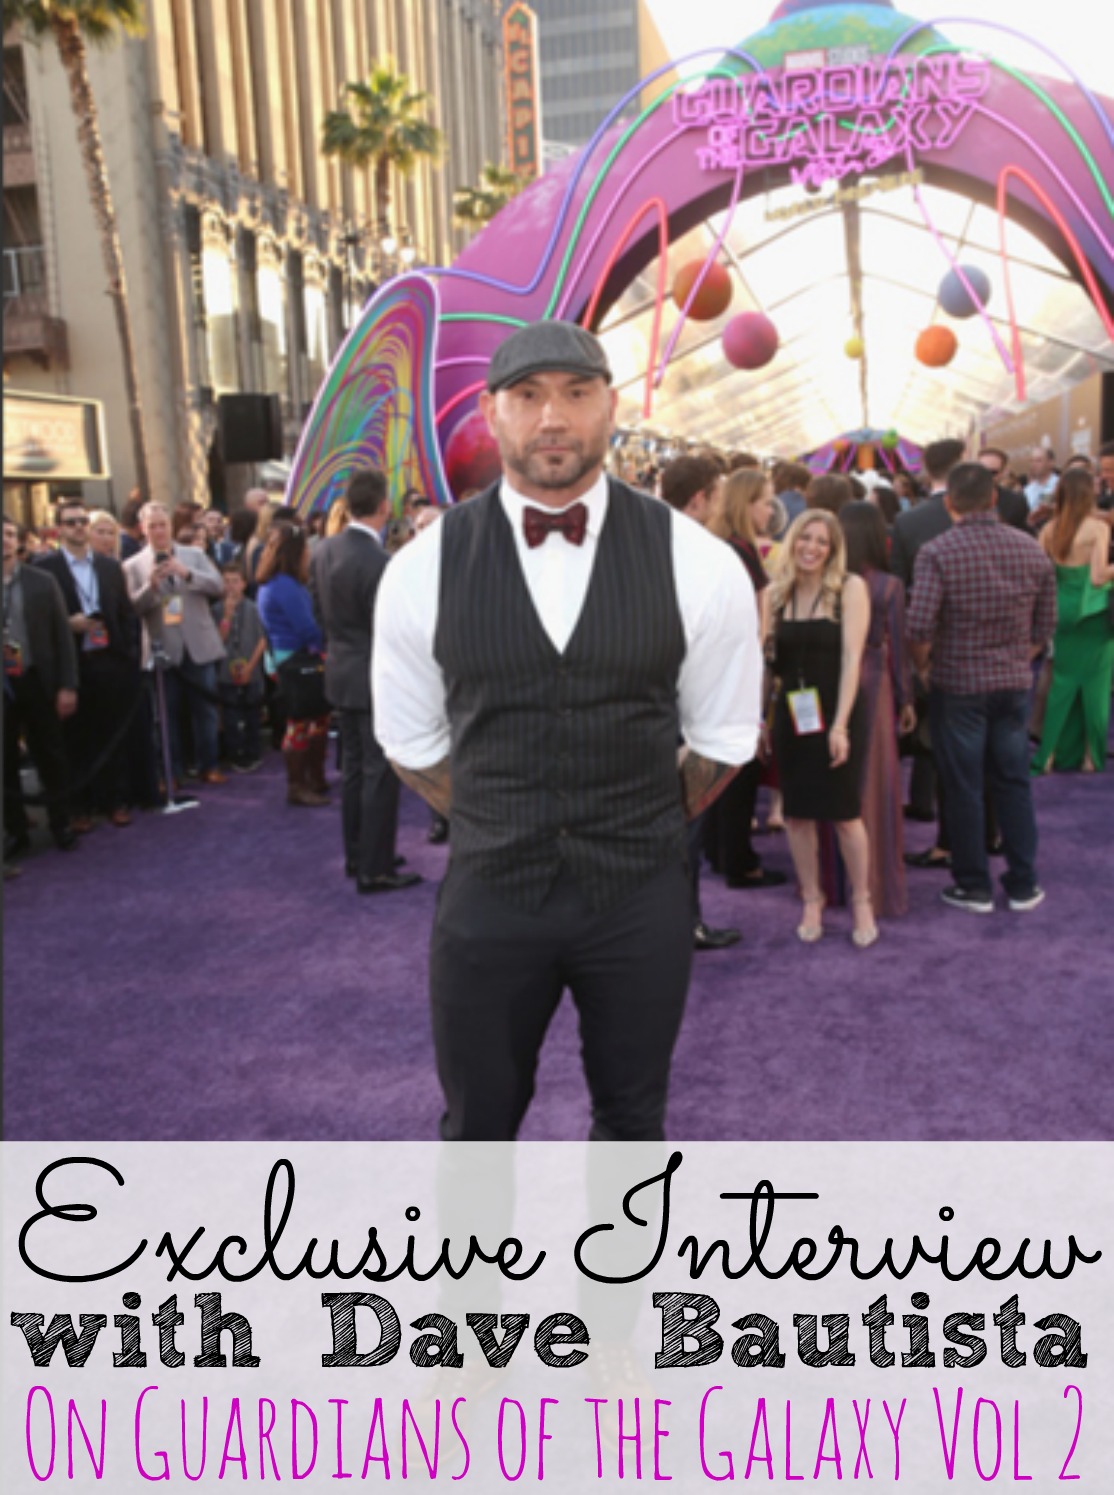 Exclusive Interview with Dave Bautista on Guardians of the Galaxy Vol 2 #GotGVol2Event